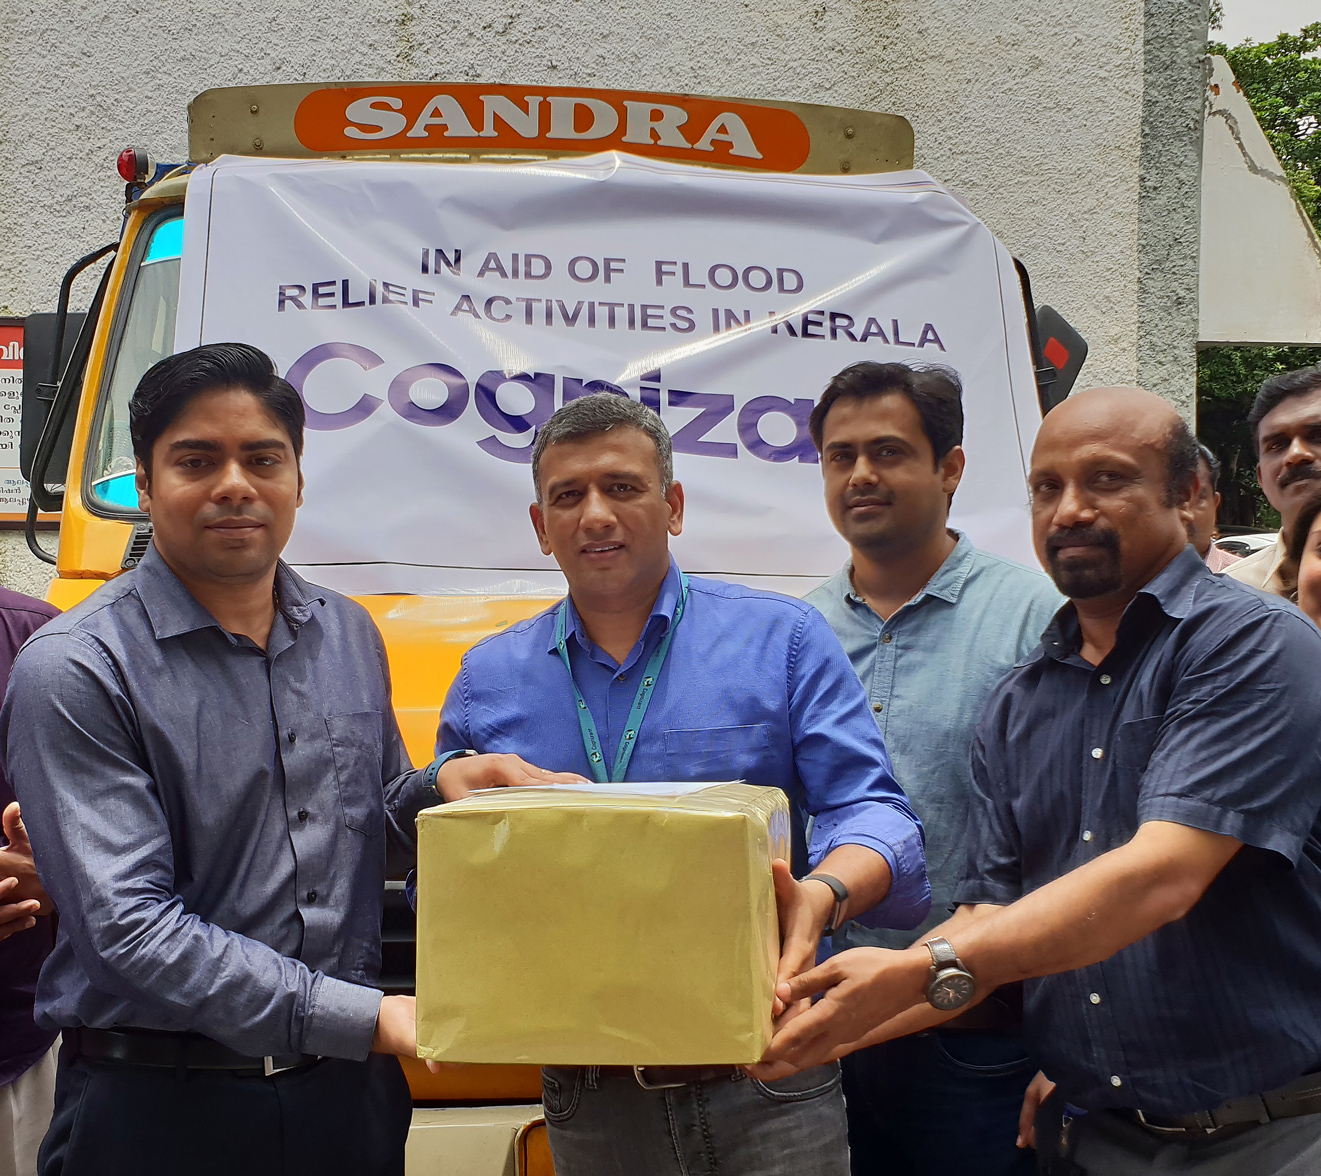 Cognizant Helps with Medicine Supplies for Flood Relief Efforts in Kerala